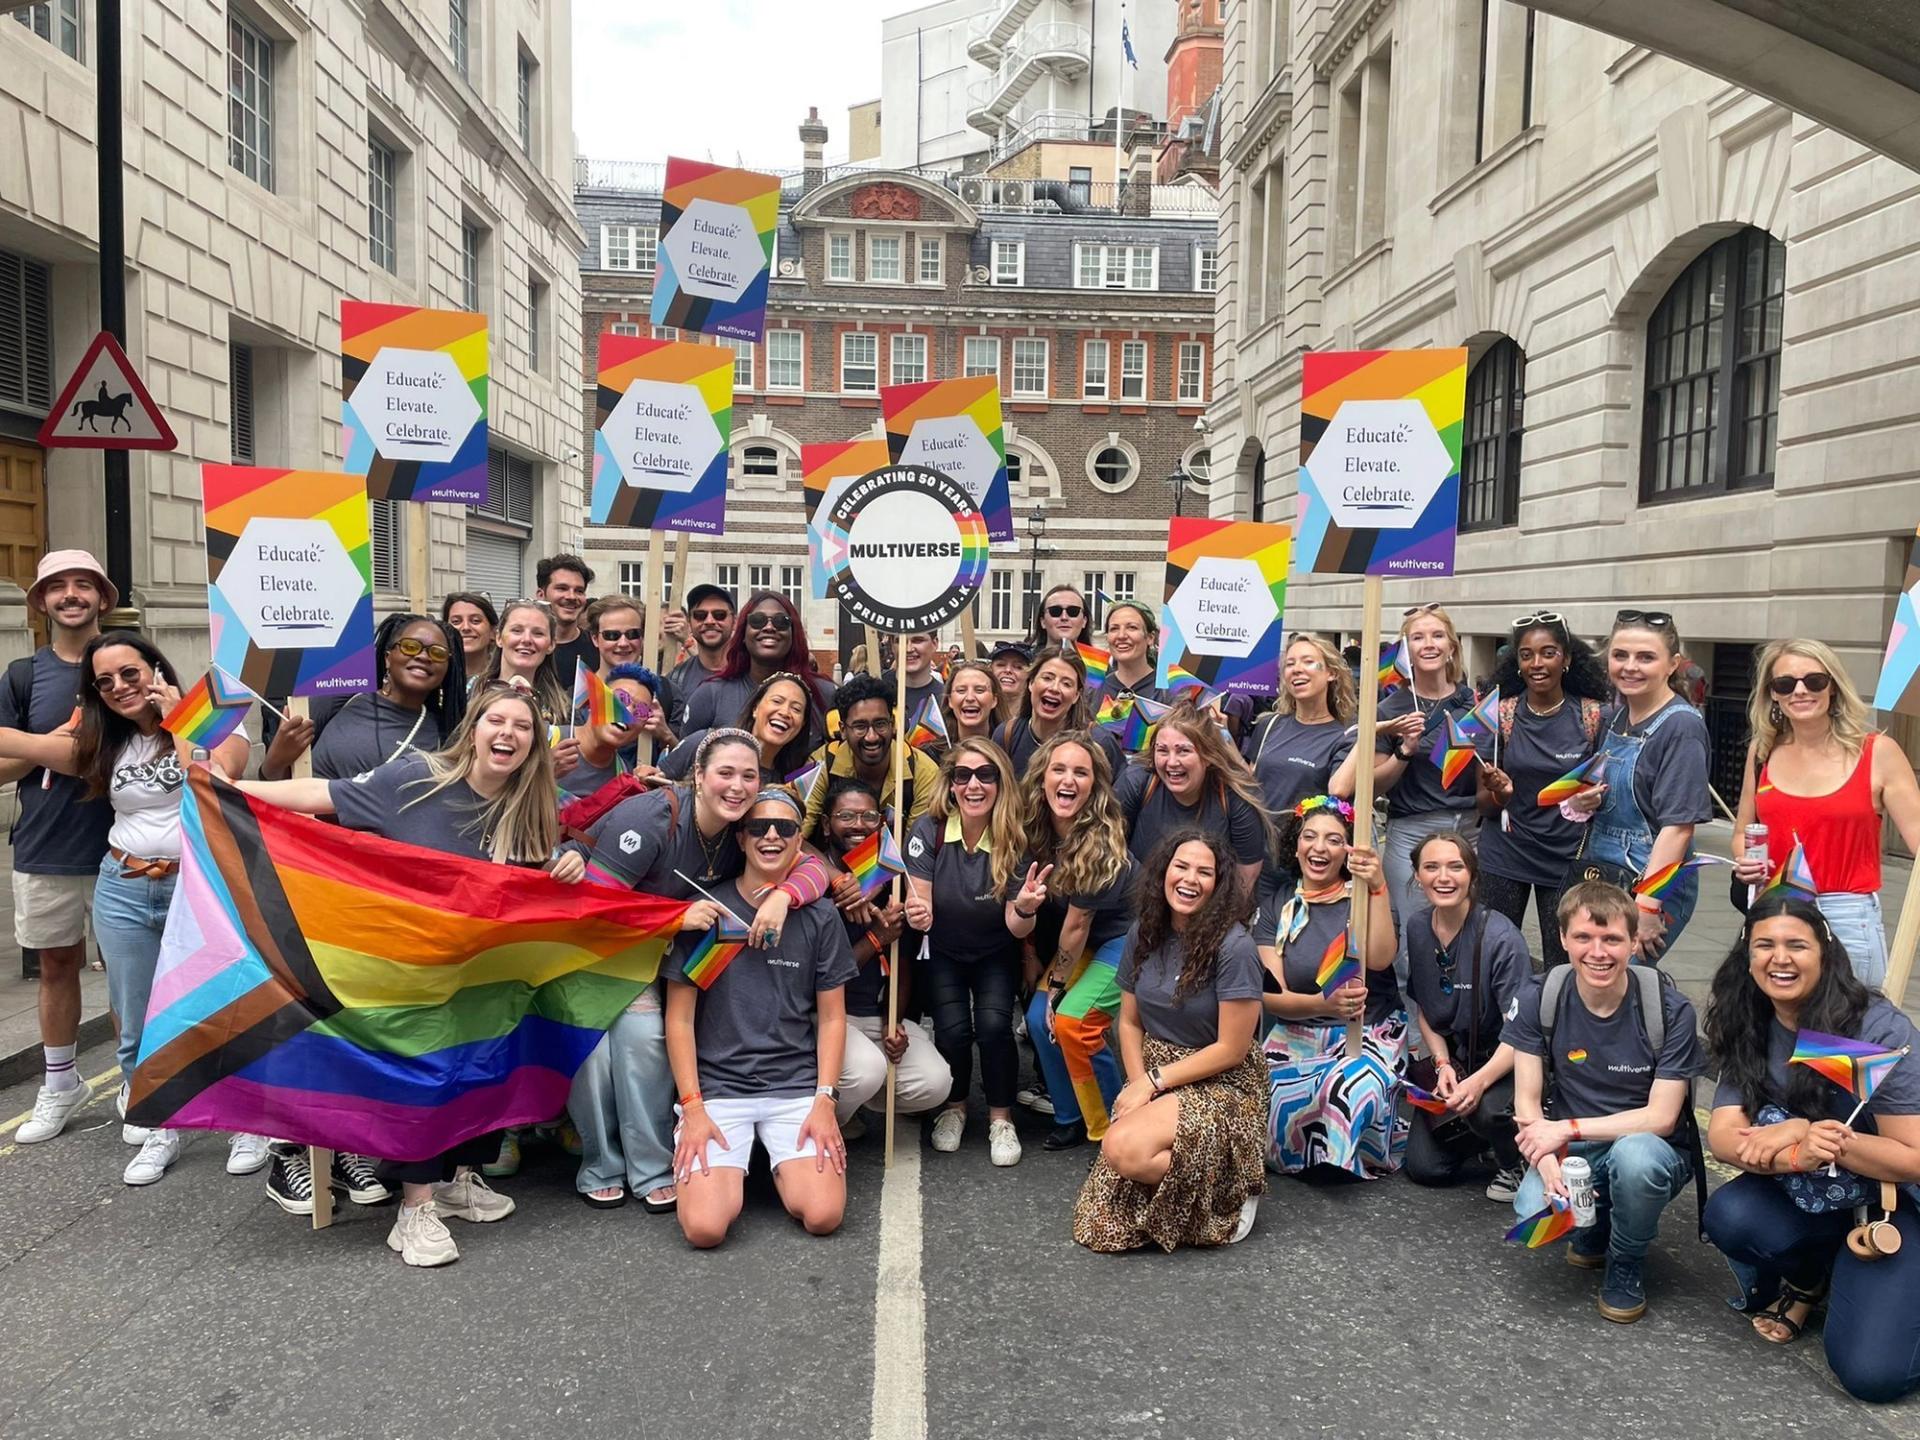 Large group of Multiverse employees at the London Pride parade